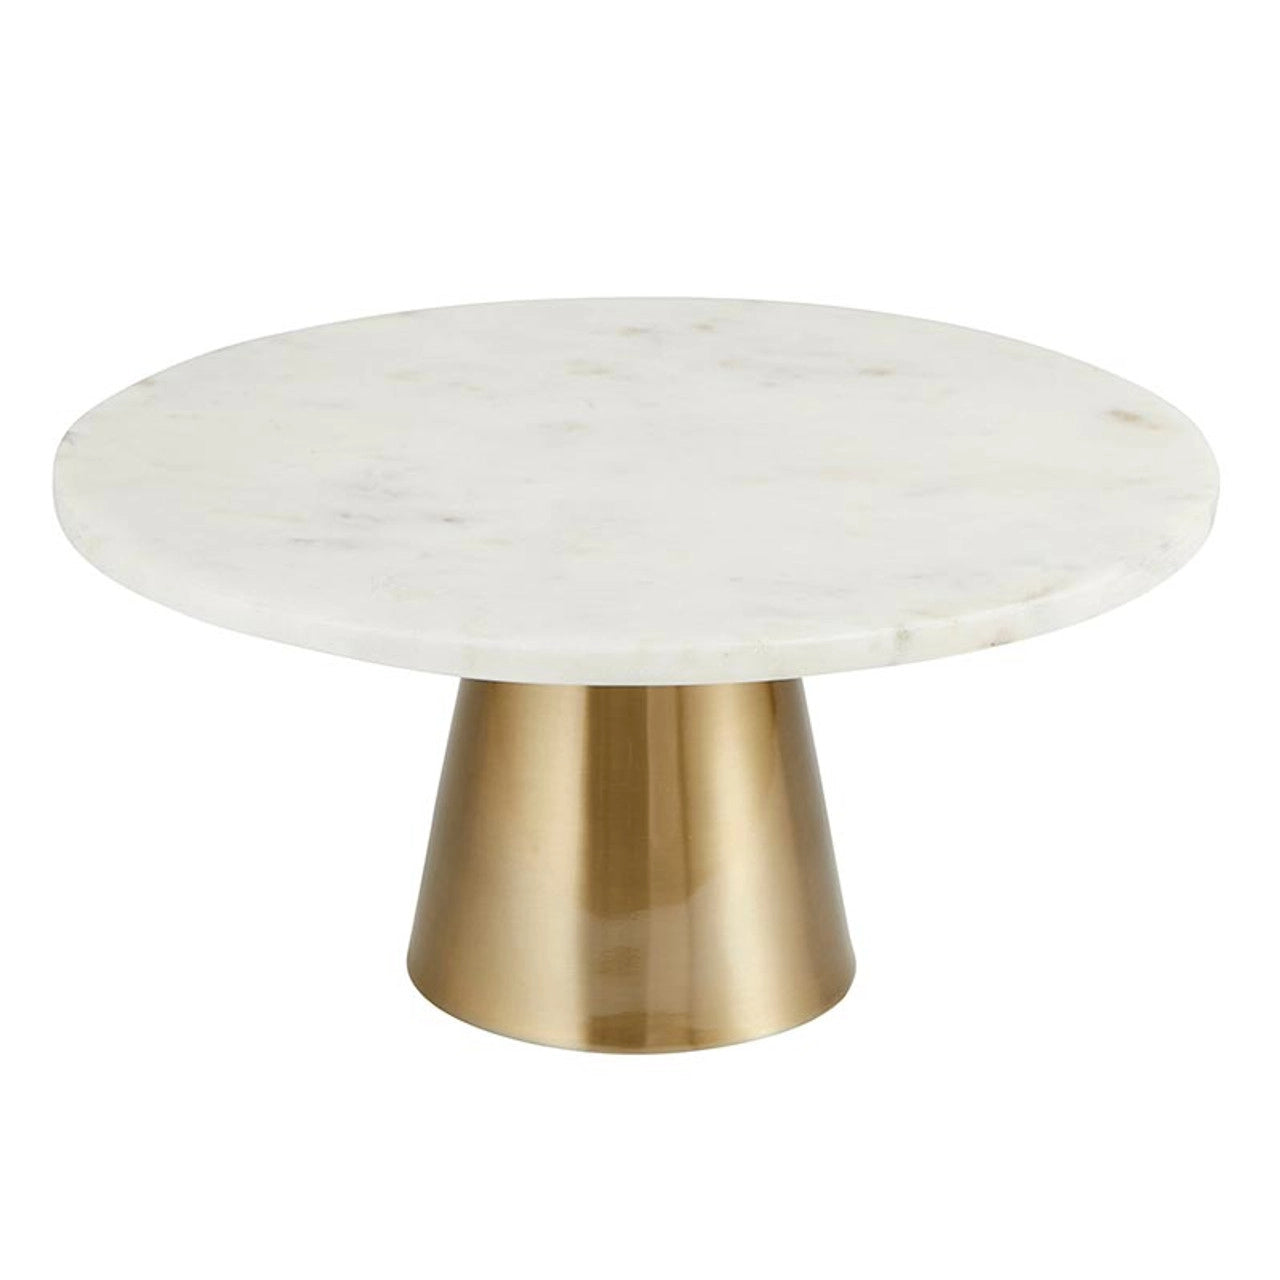 Marble and brass Cake Stand - Brass and Marble